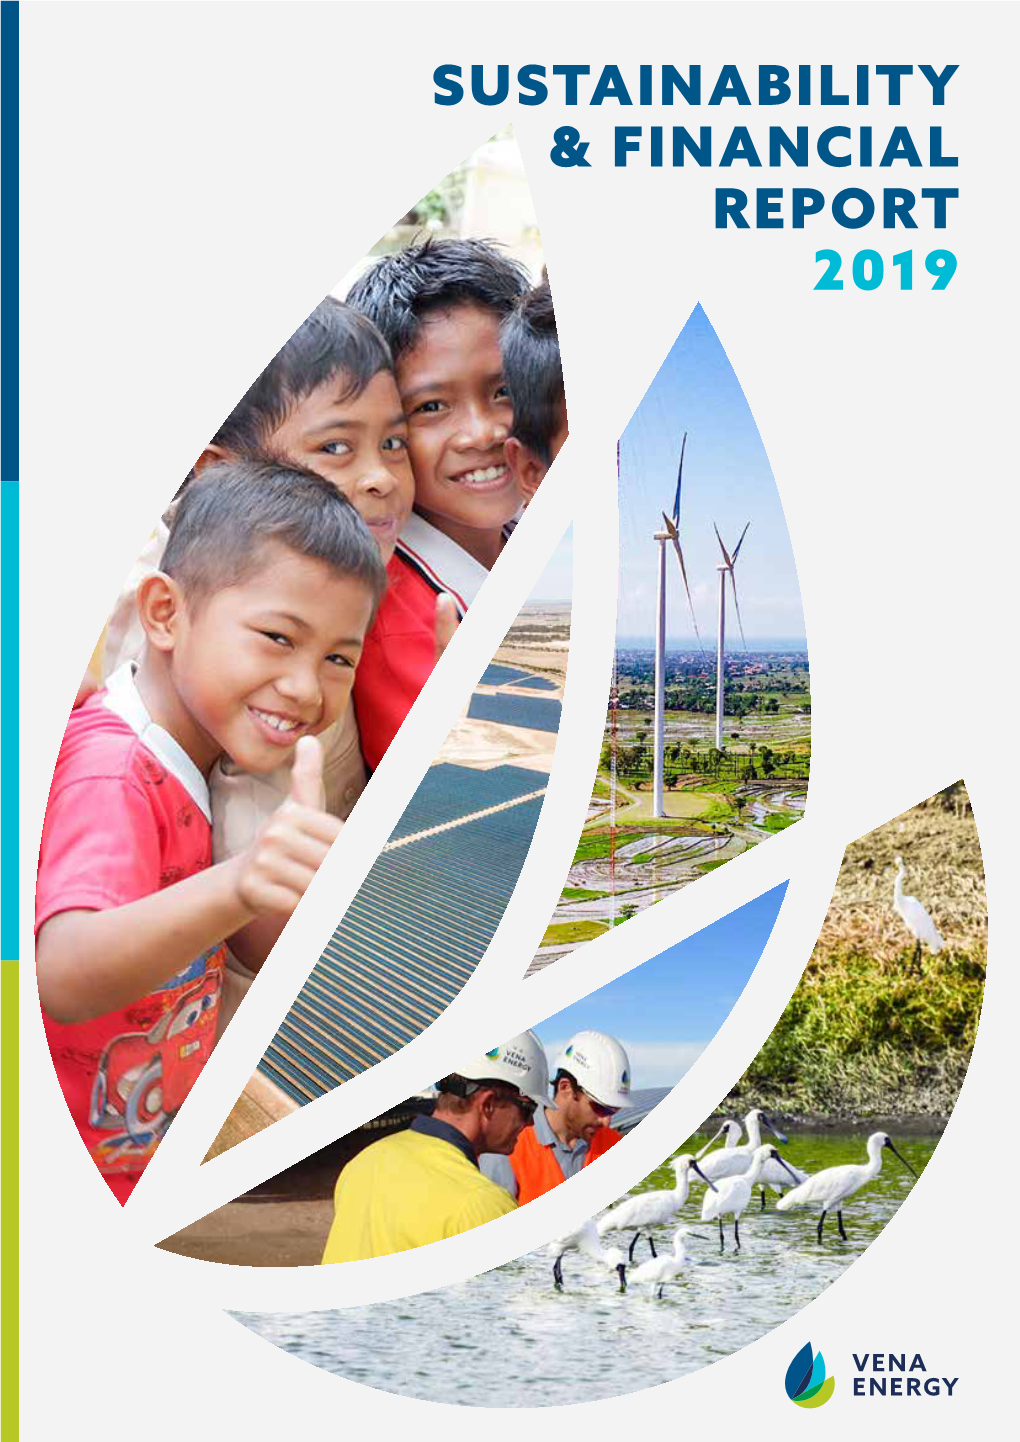 Sustainability & Financial Report 2019